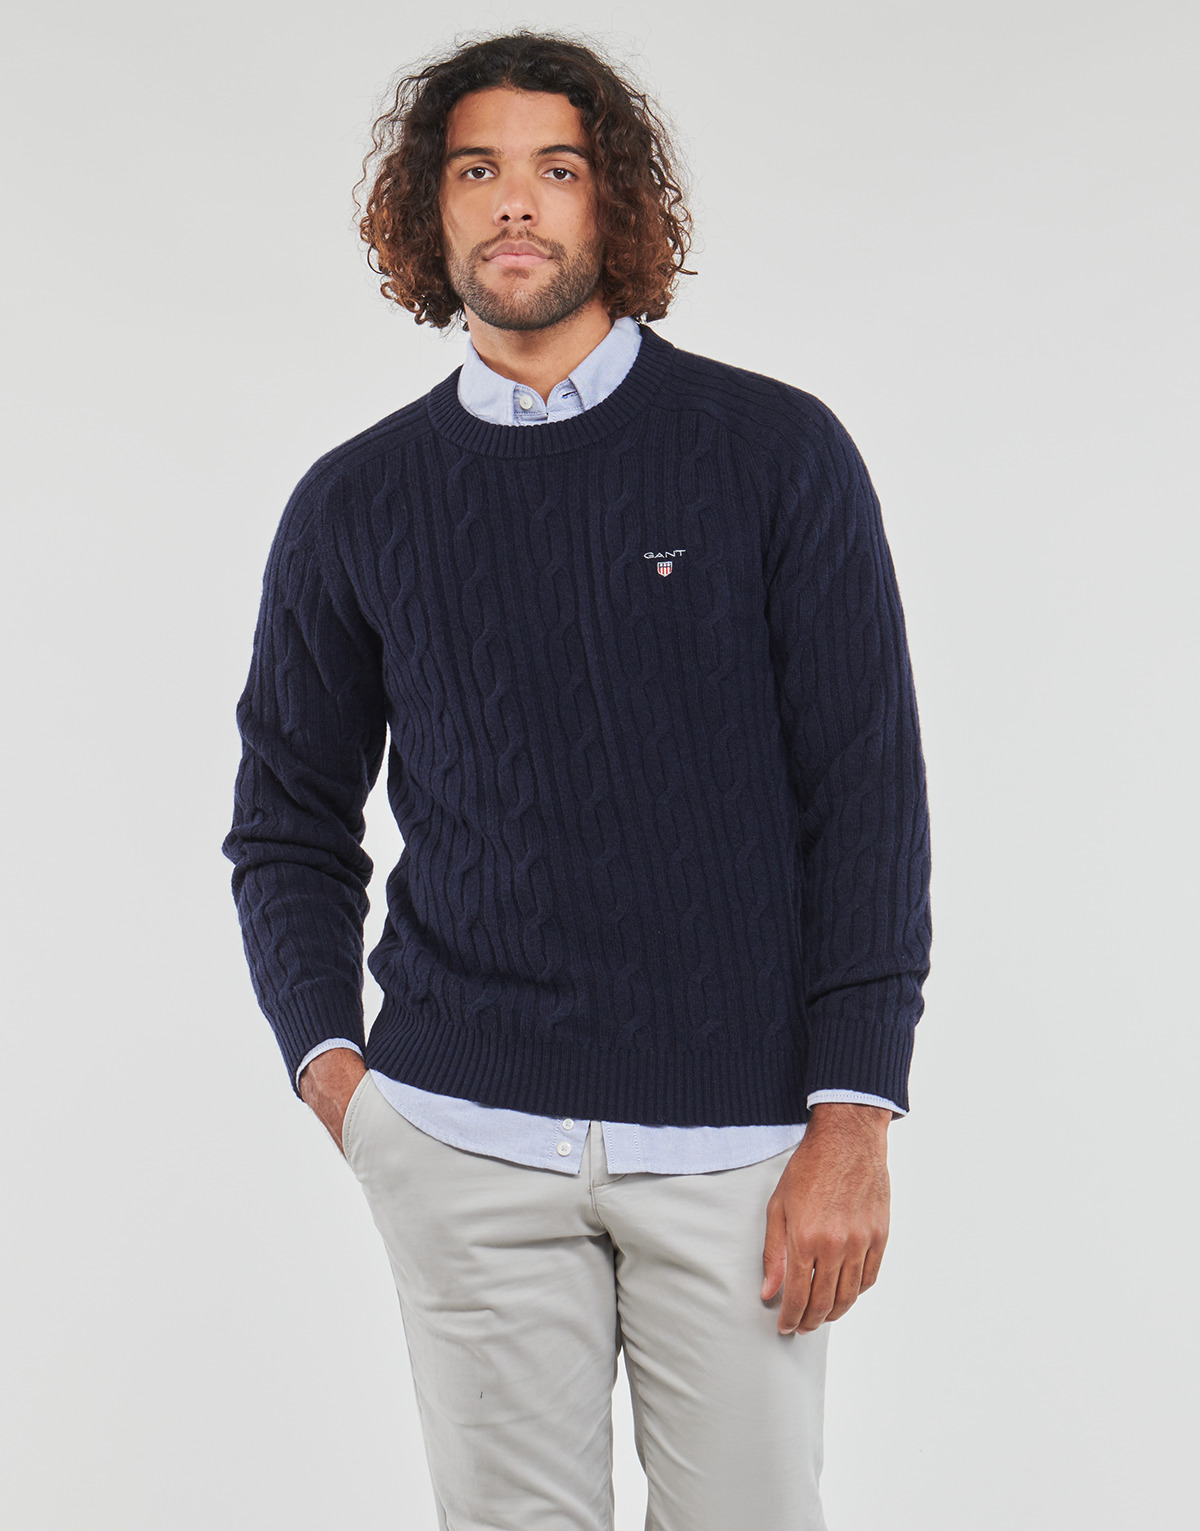 Gant Marine LAMBSWOOL CABLE C-NECK lS7AapBl